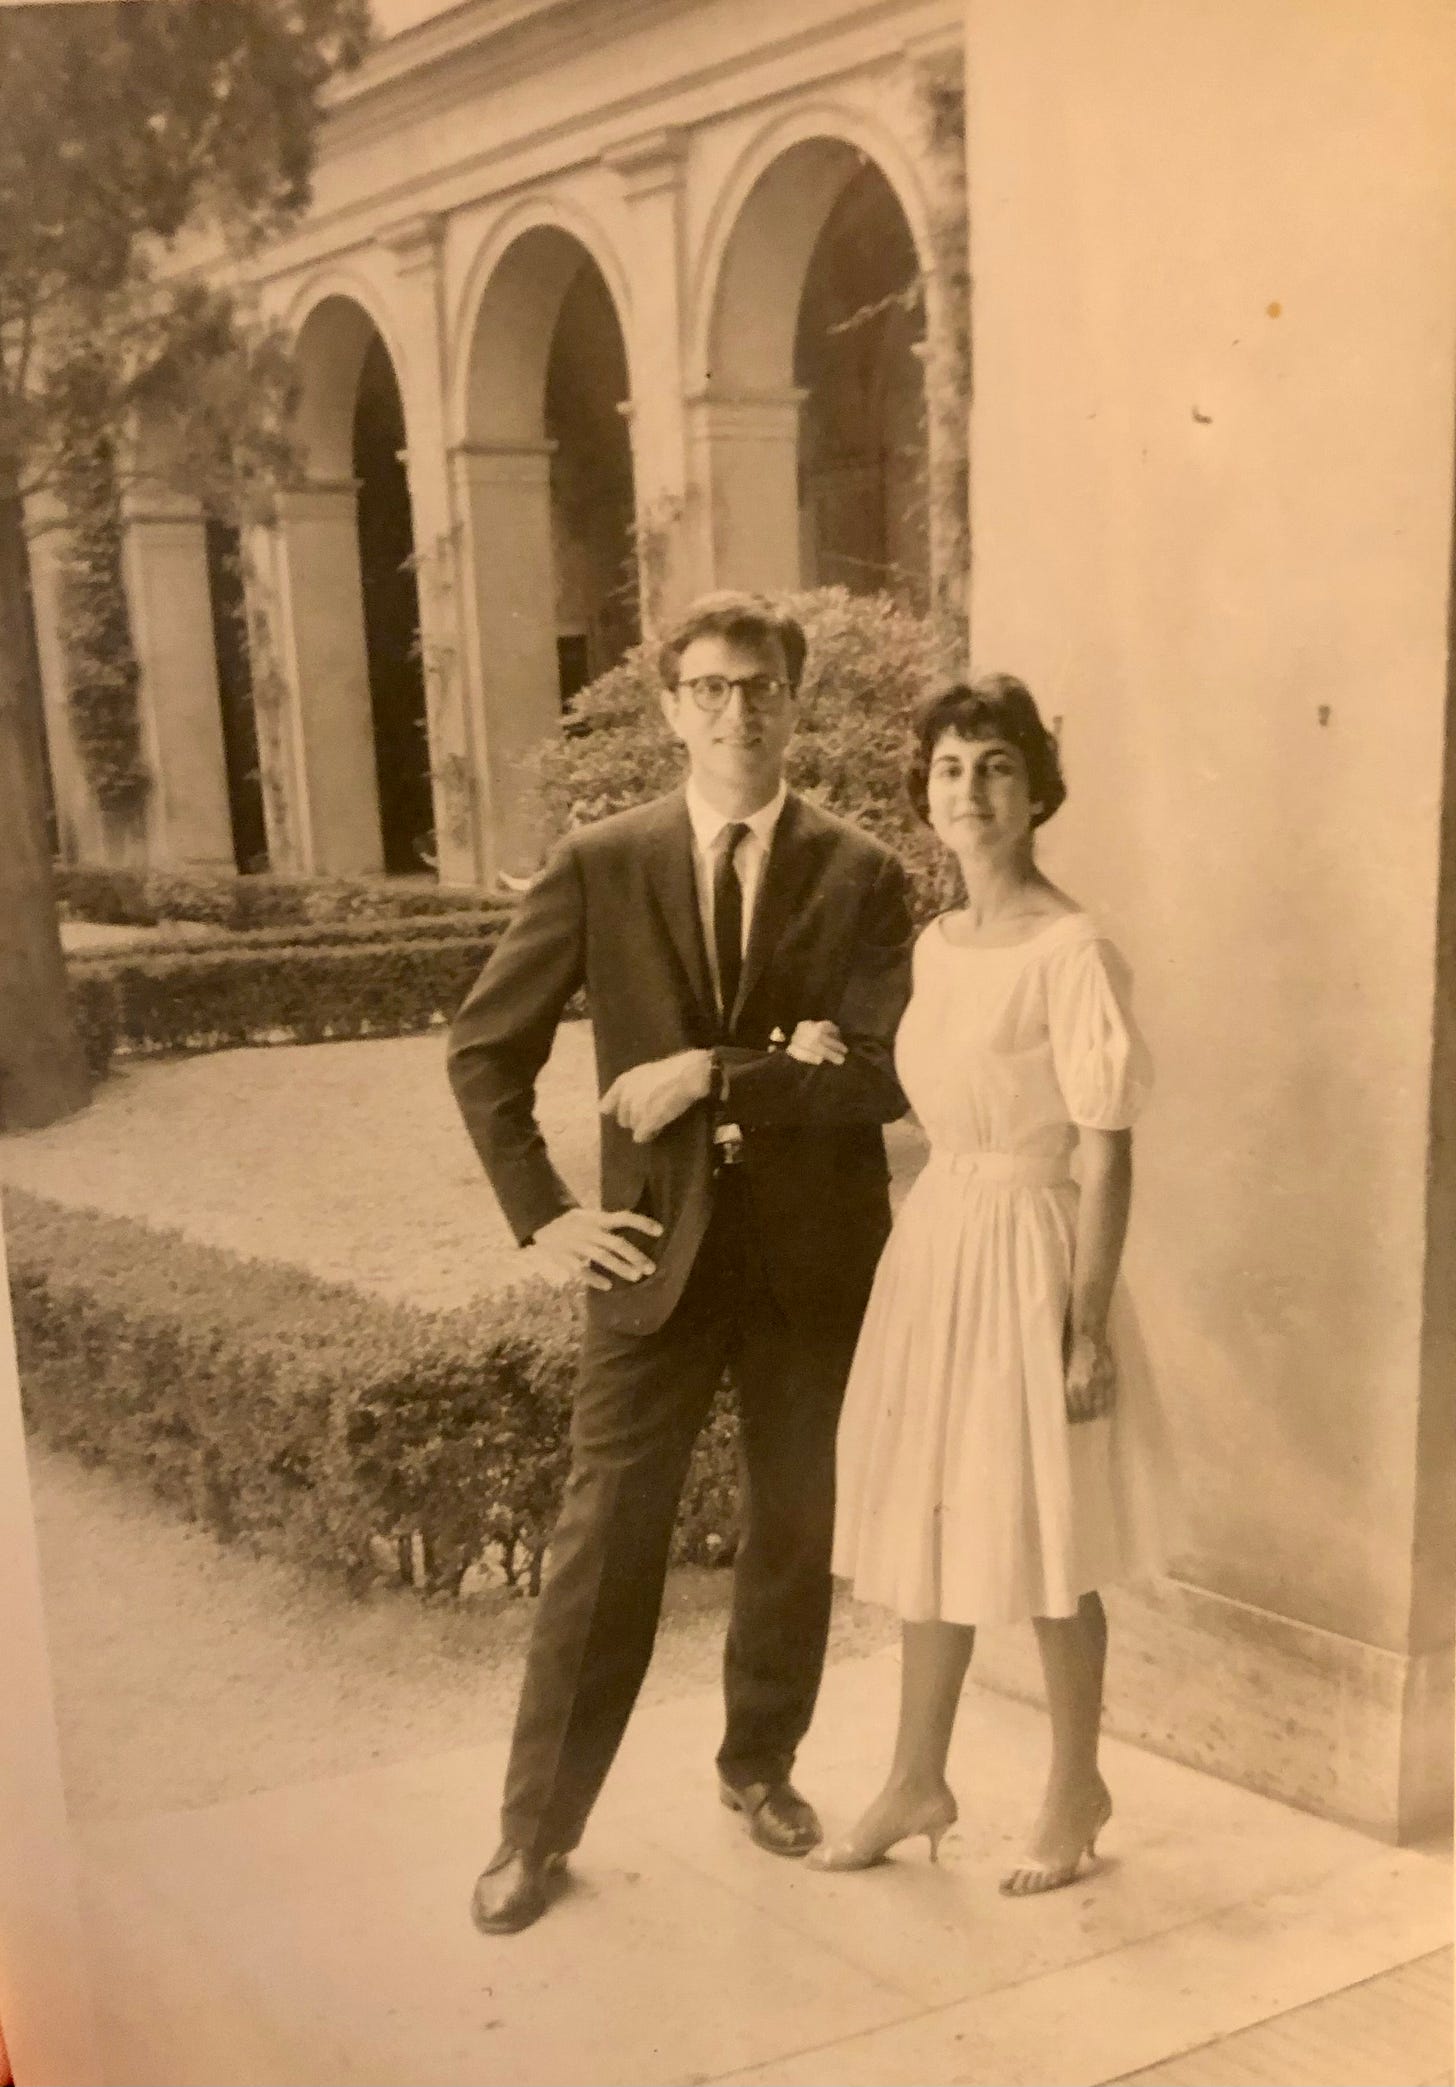 A couple dressed for a party pose for a photo, her arm in his, in a courtyard with archways behind them and hedges.